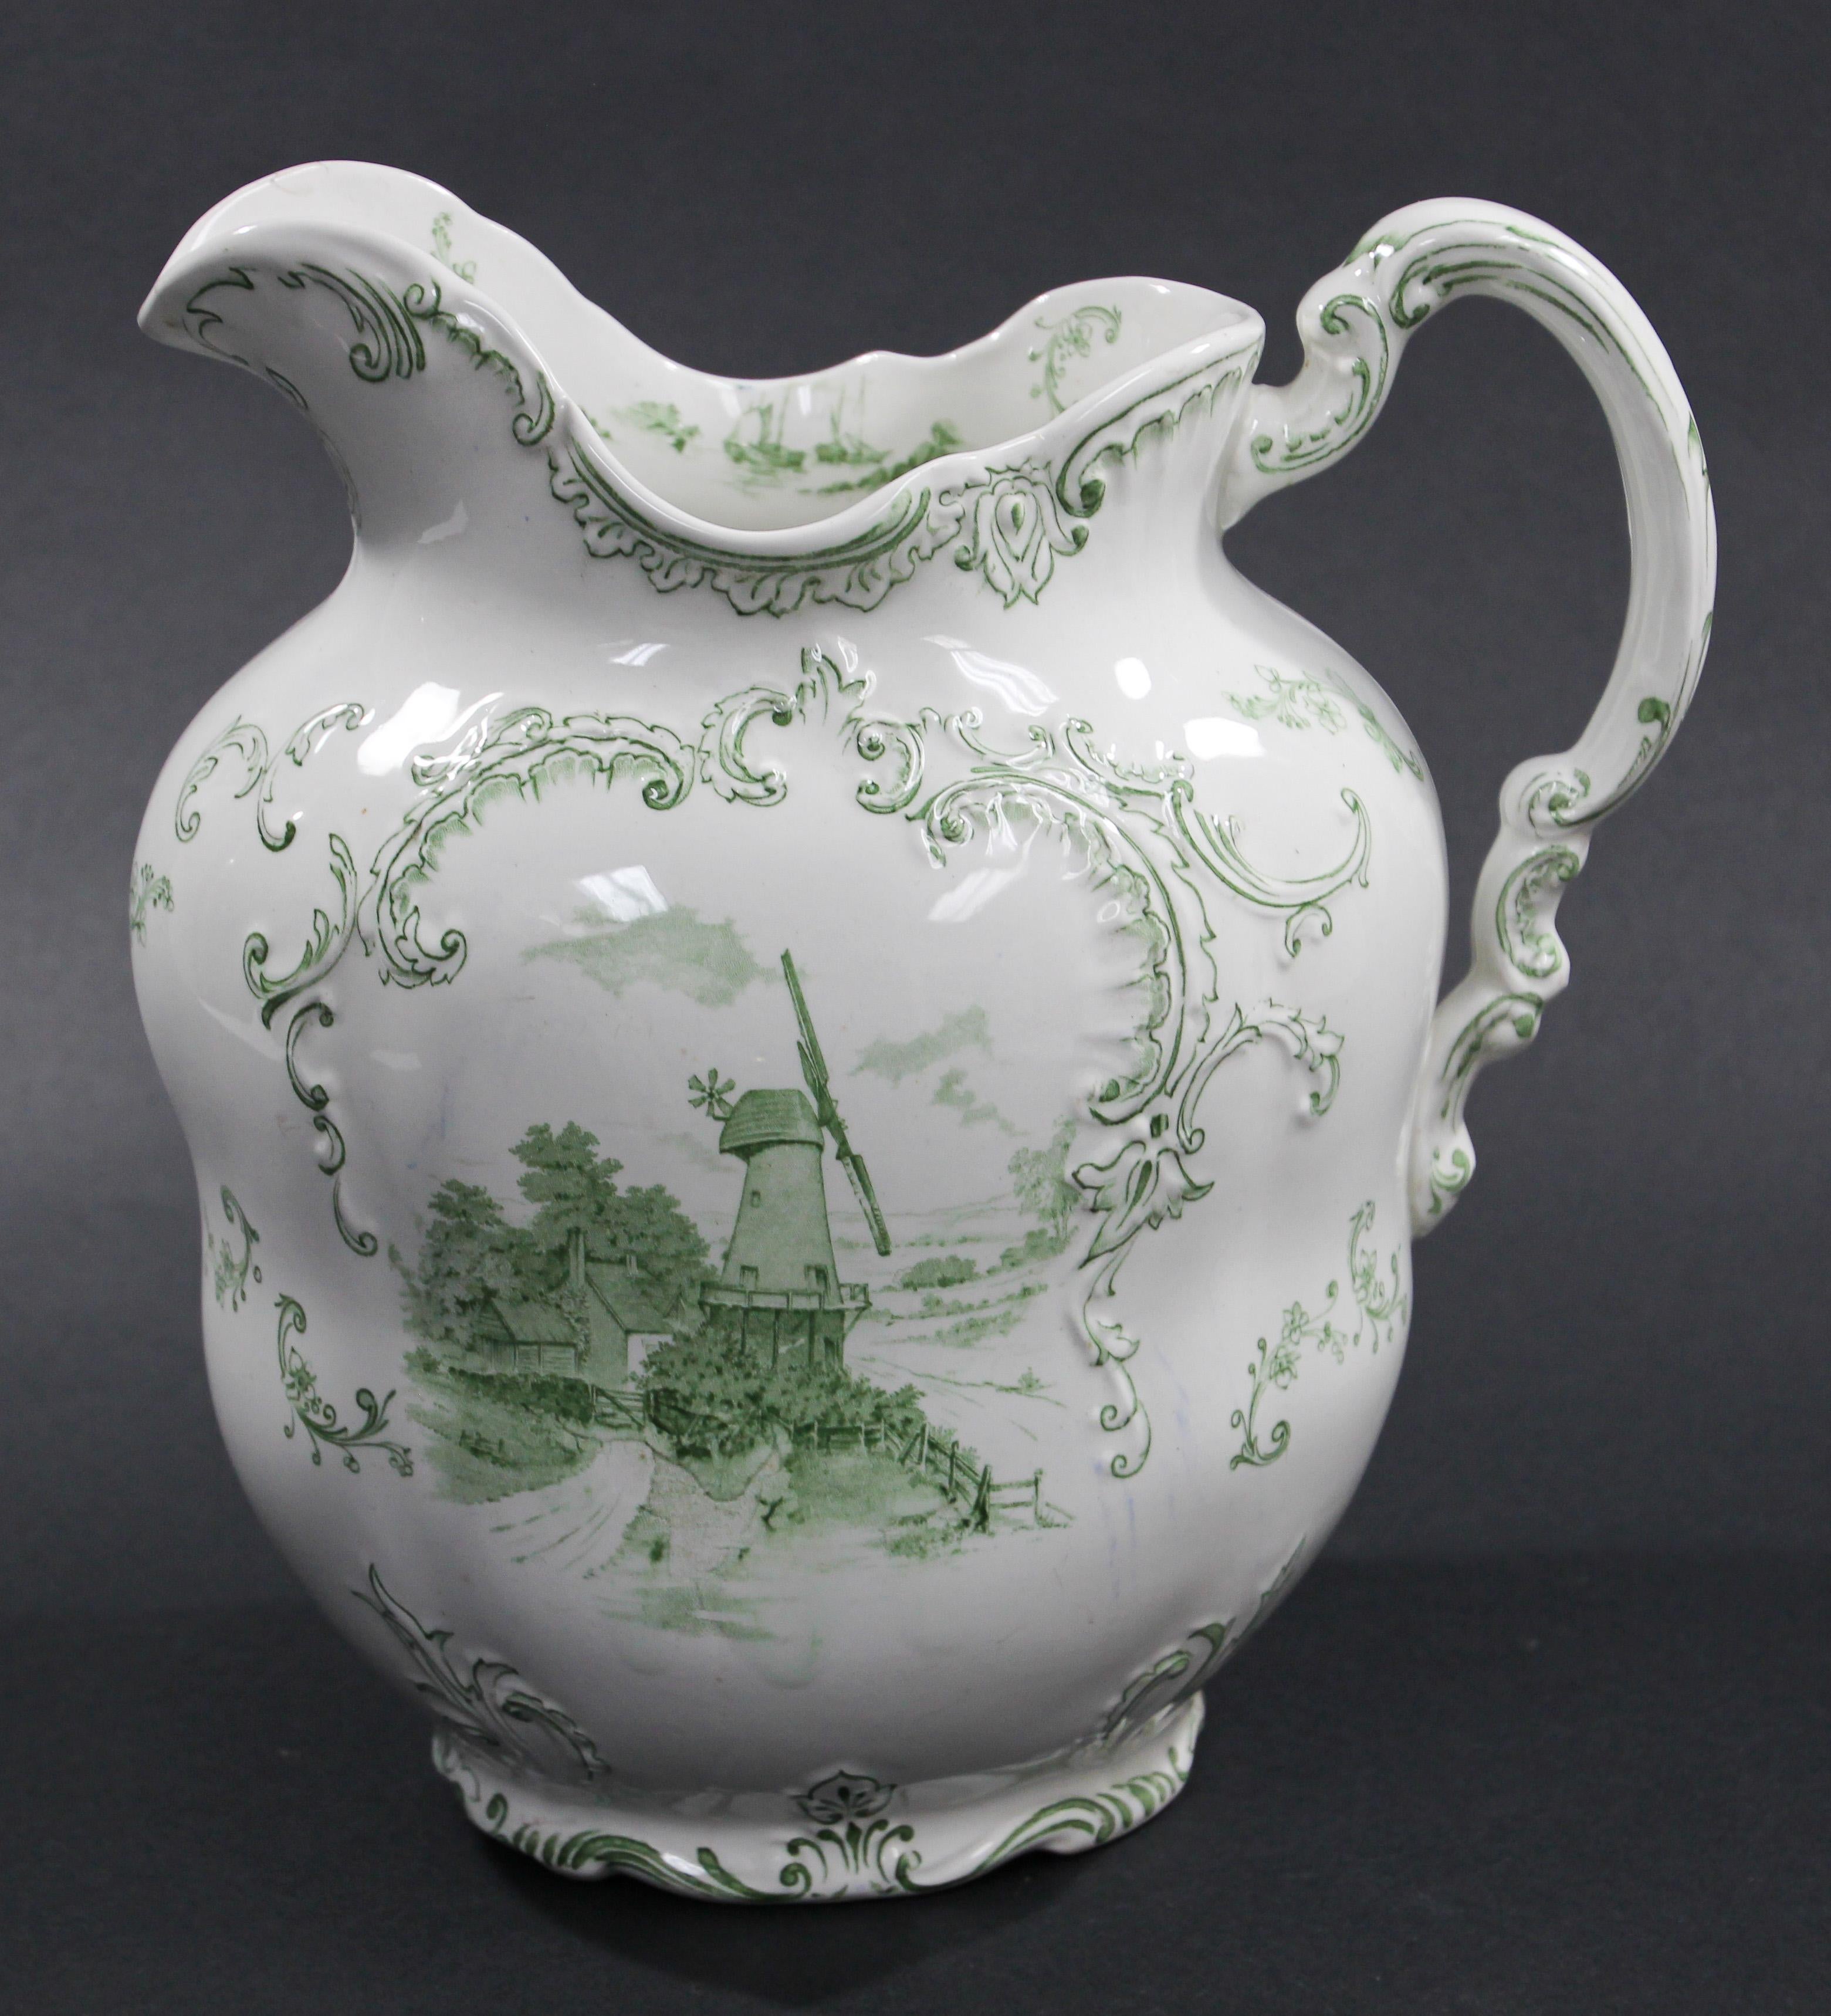 Folk Art Large Ceramic Pitcher Green and White by Royal Delft England